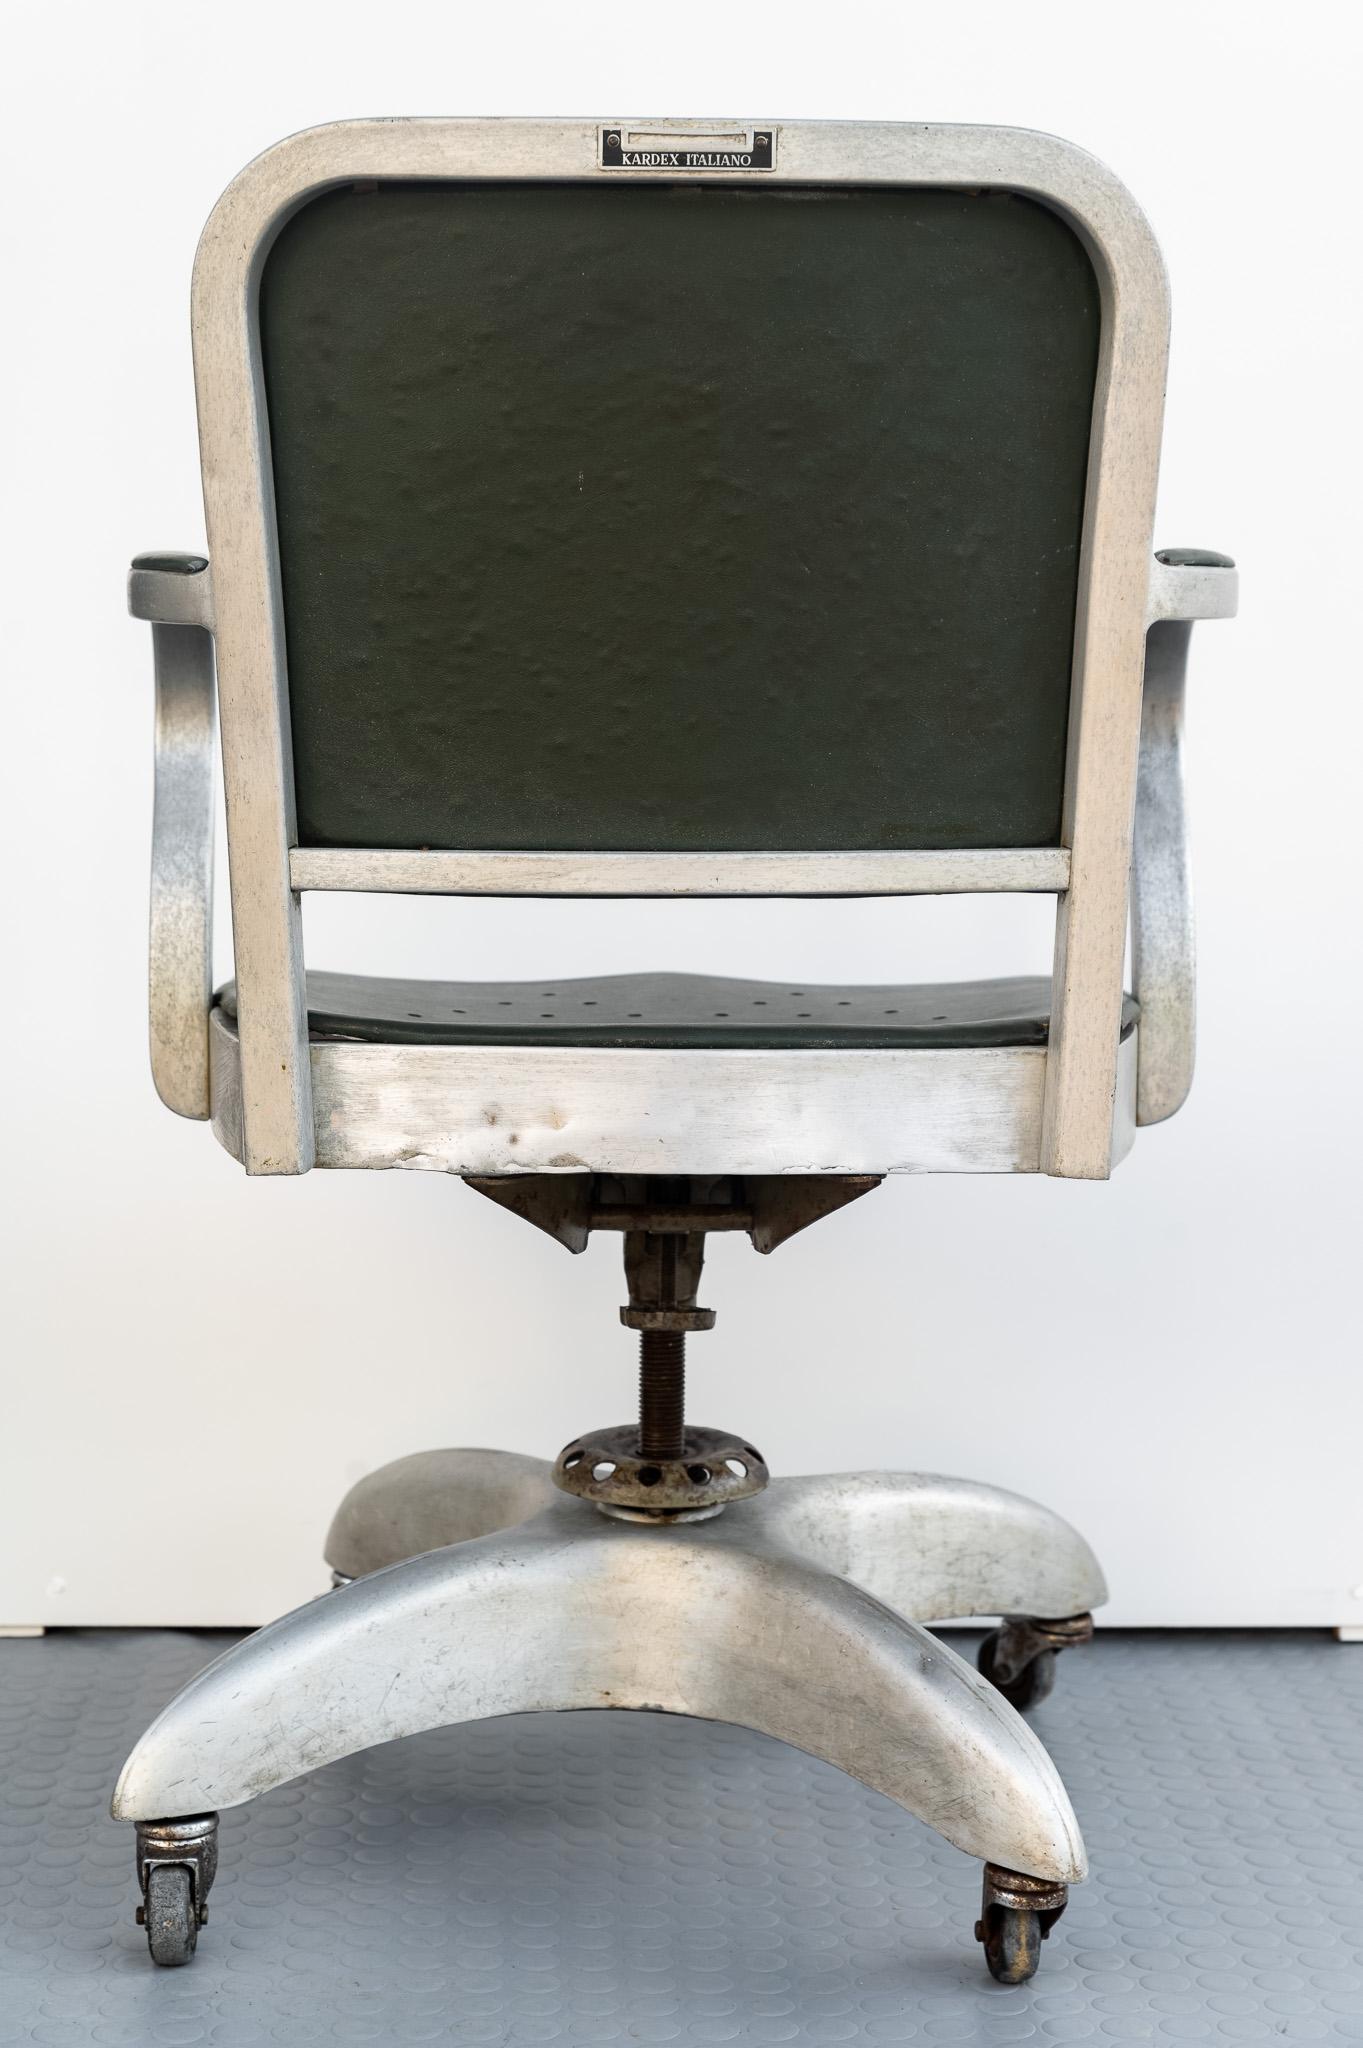 Kardex Italia chair, 1930s.
Steel and aluminum office swivel chair in vinyl-covered patina. 
On the back of the backrest is a label with 